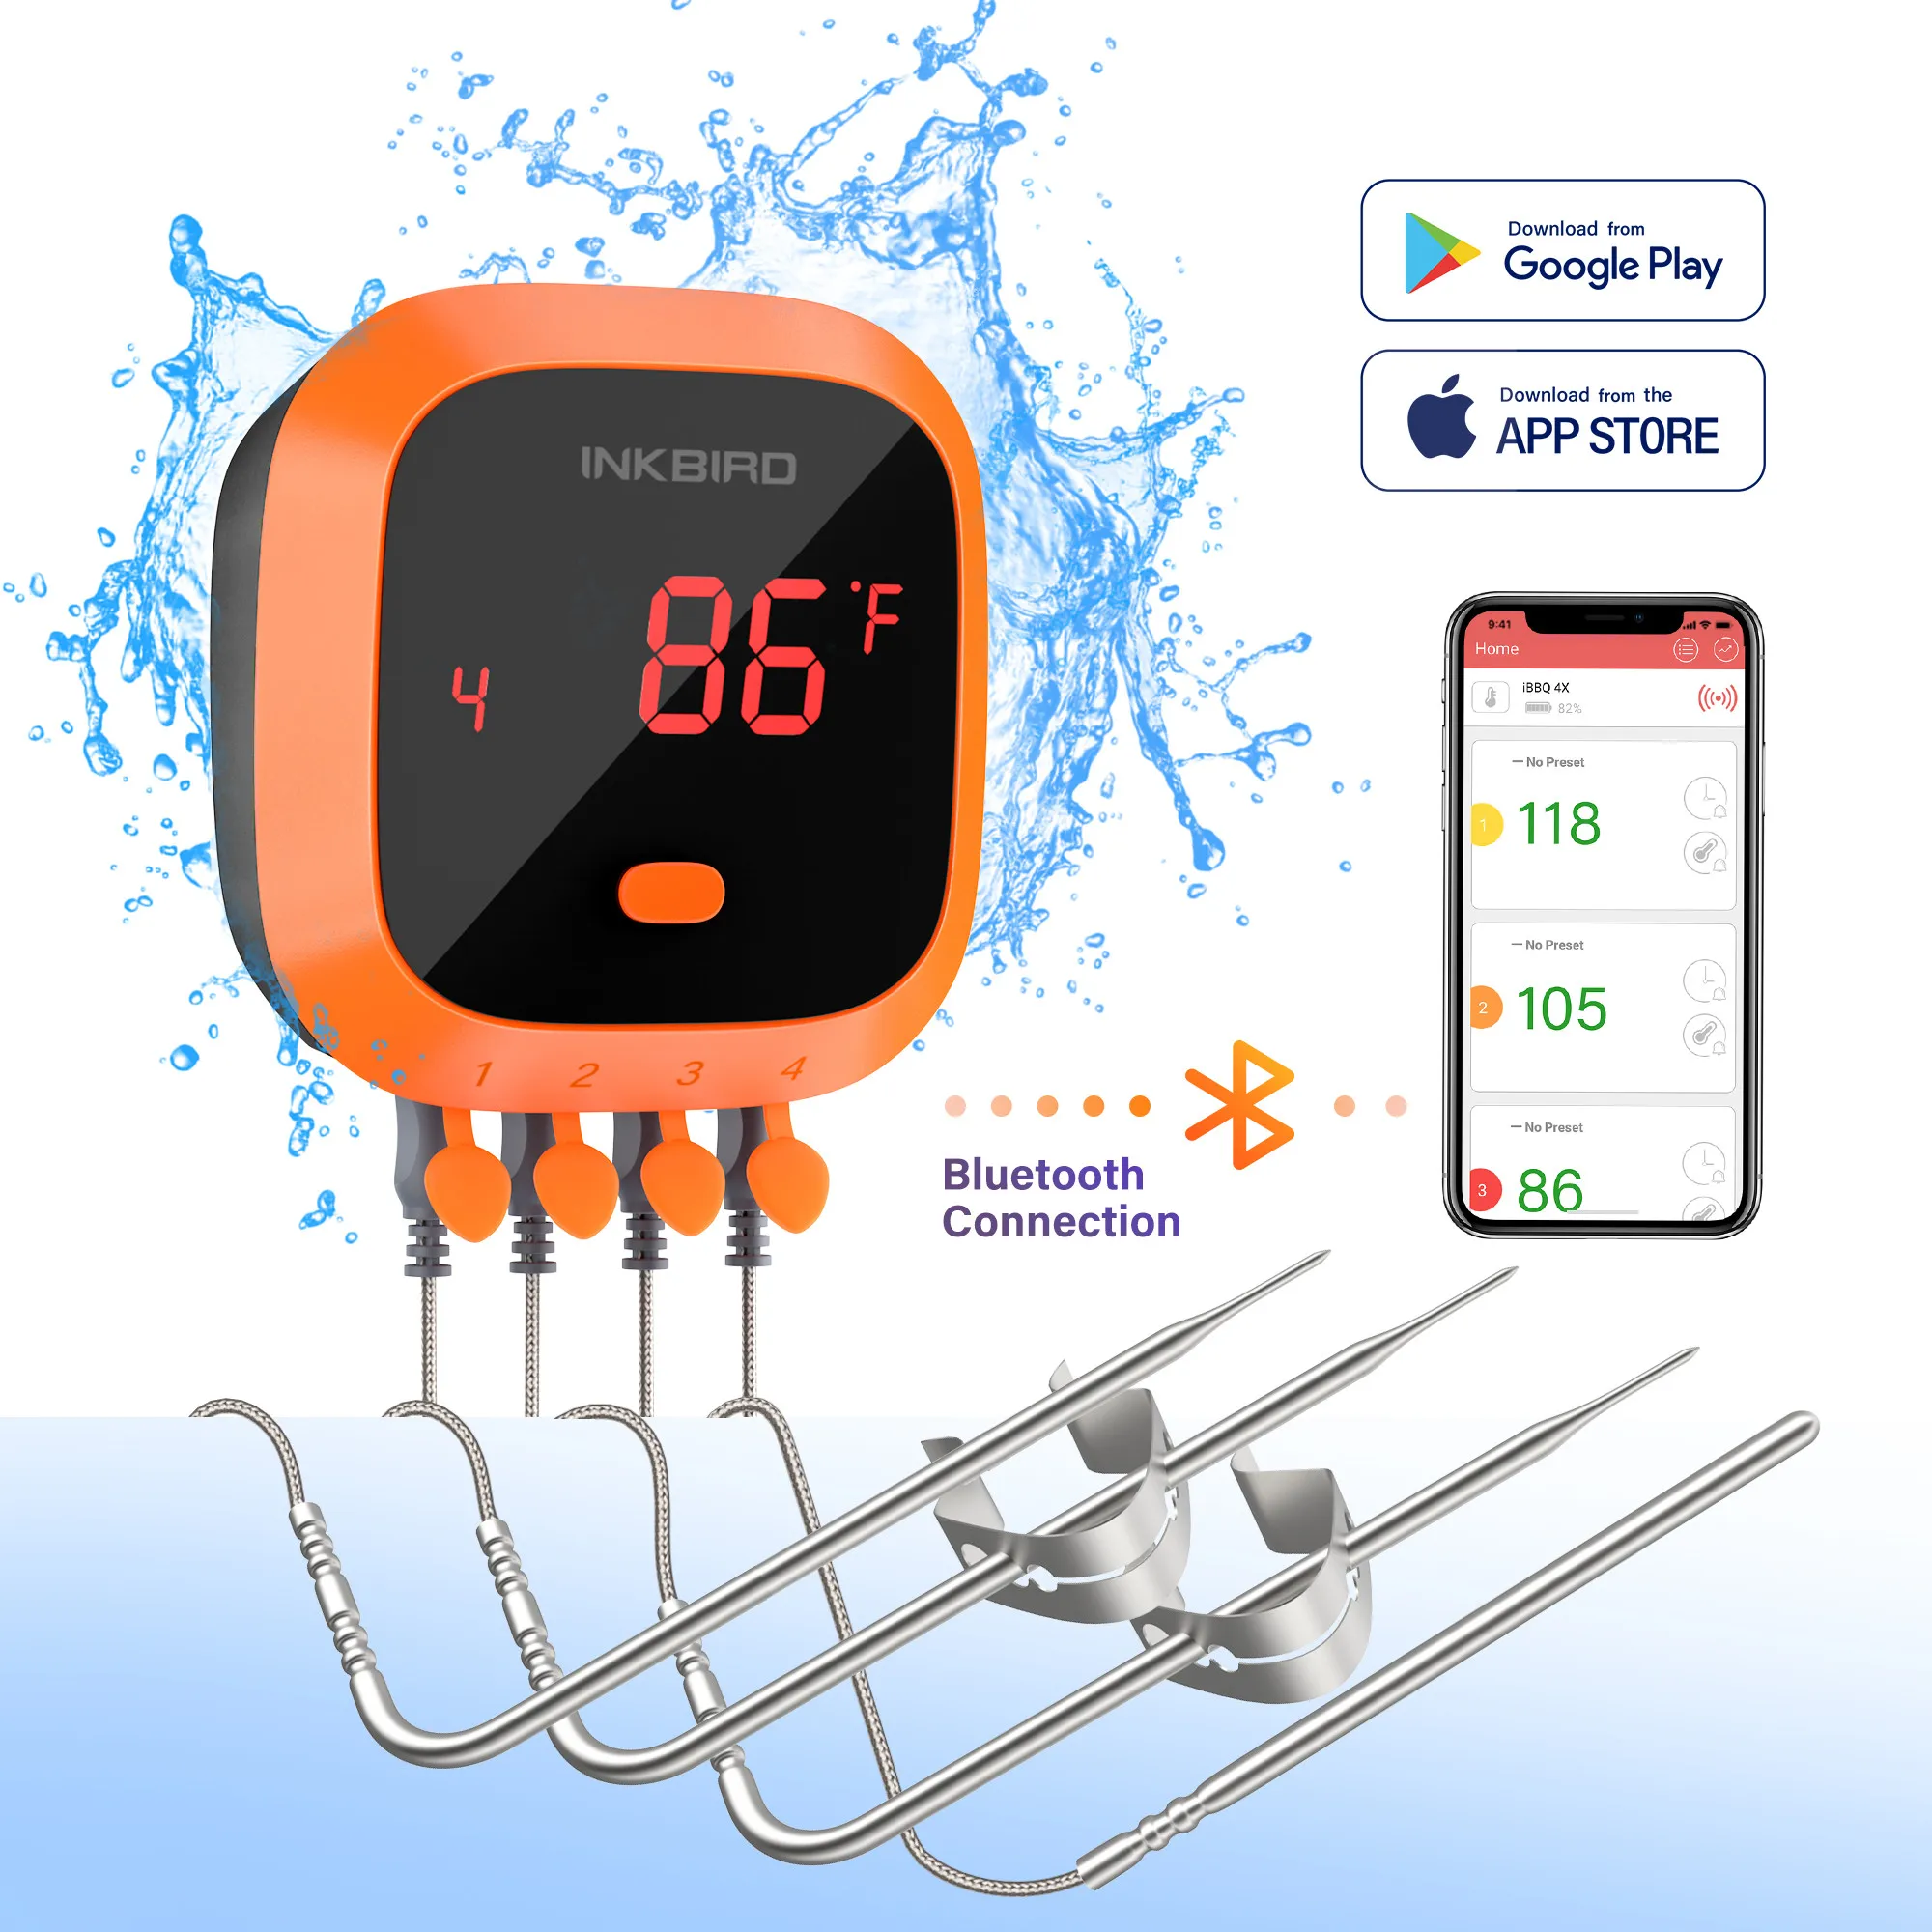 INKBIRD IBT-4XC Bluetooth Wireless Digital Thermometer With Rechargeable Magnet Thermometer for Kitchen,Cooking,Smoker,Oven,BBQ